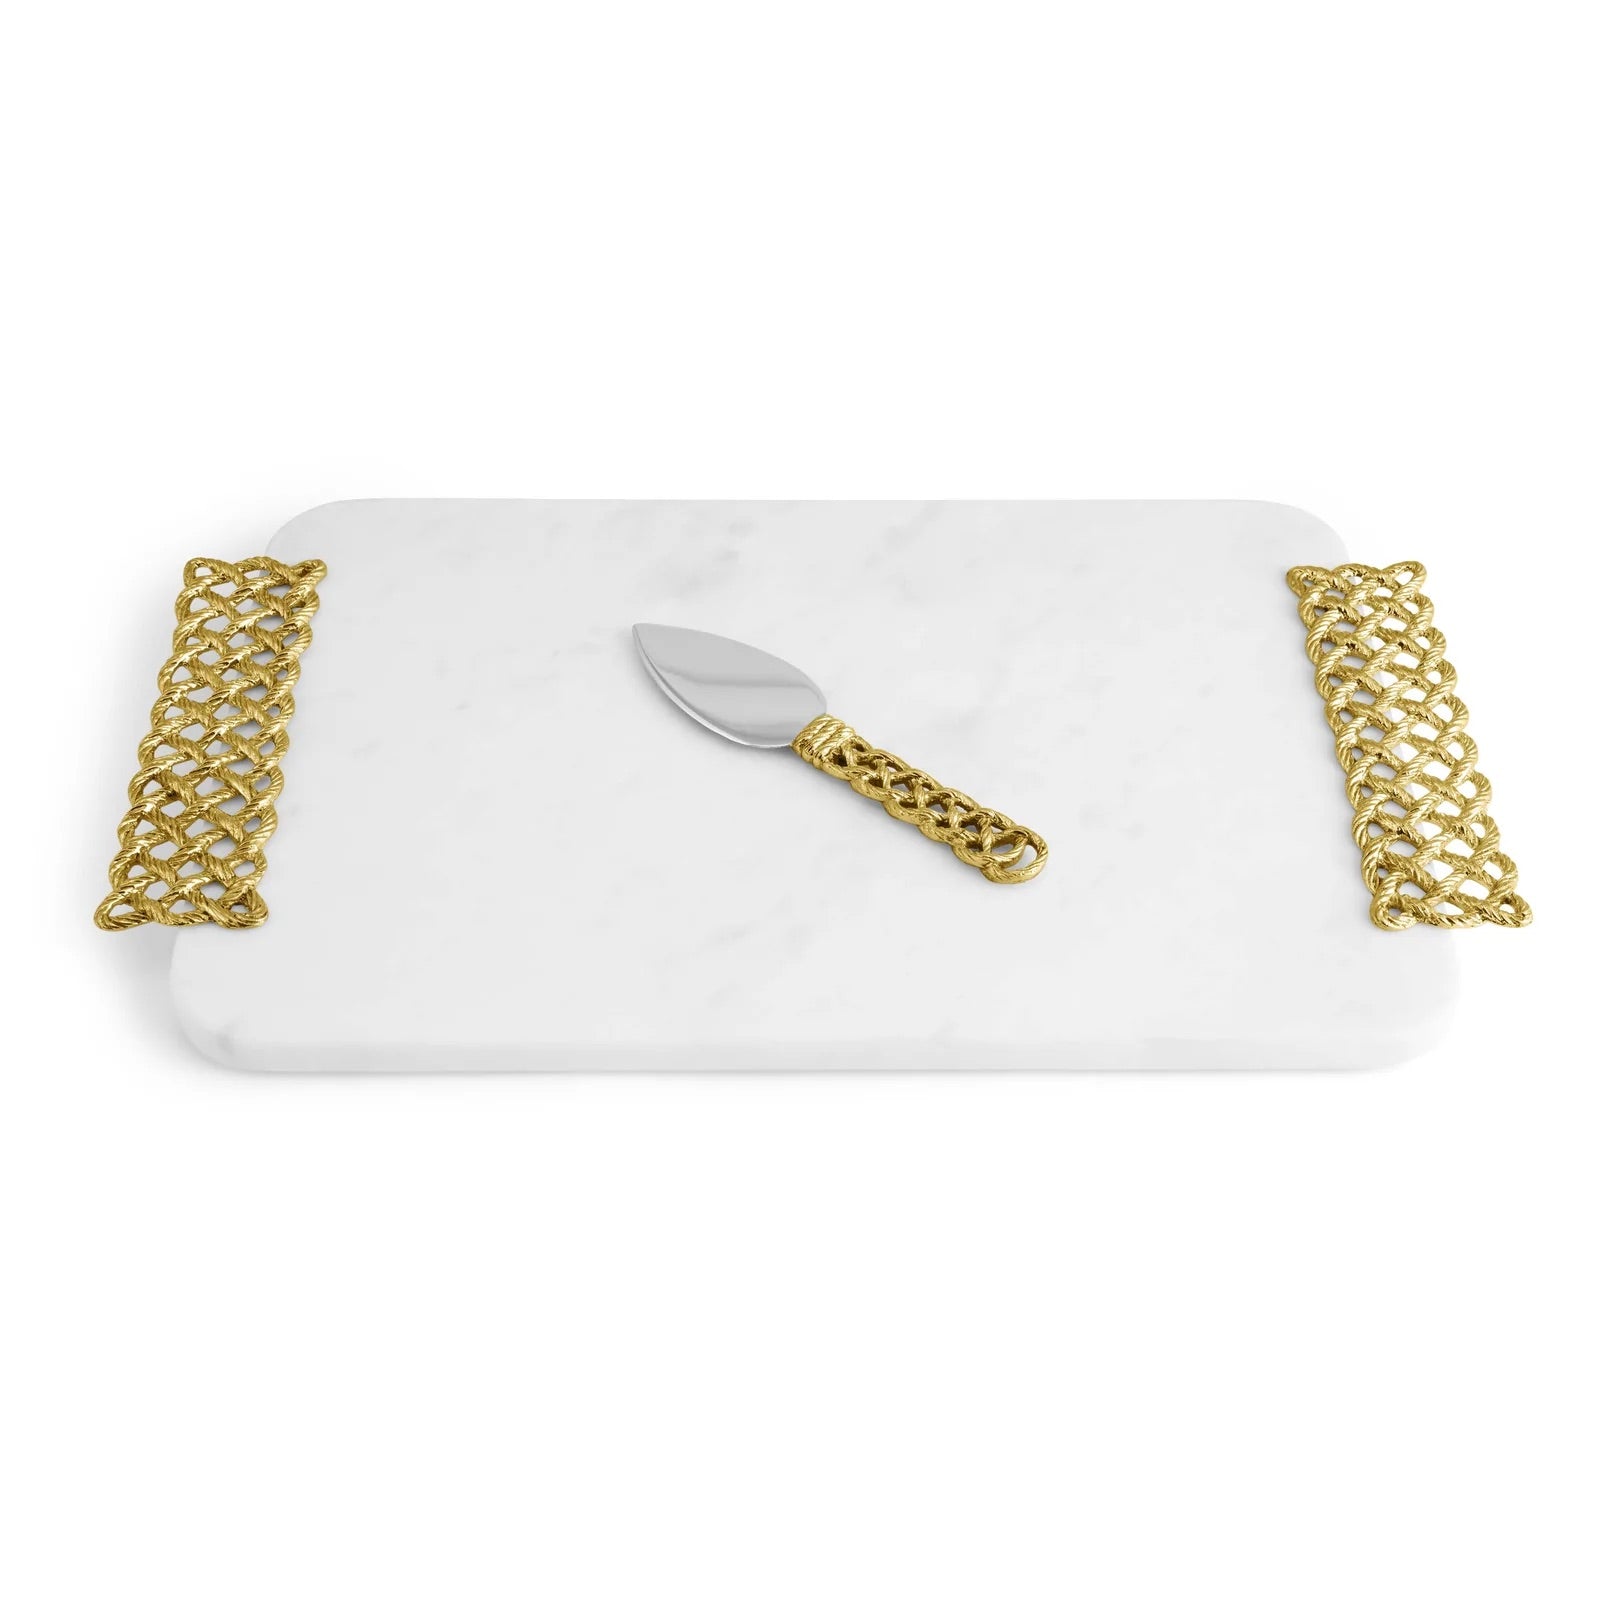 Aram Love Knot Marble Cheese Board and Spreader